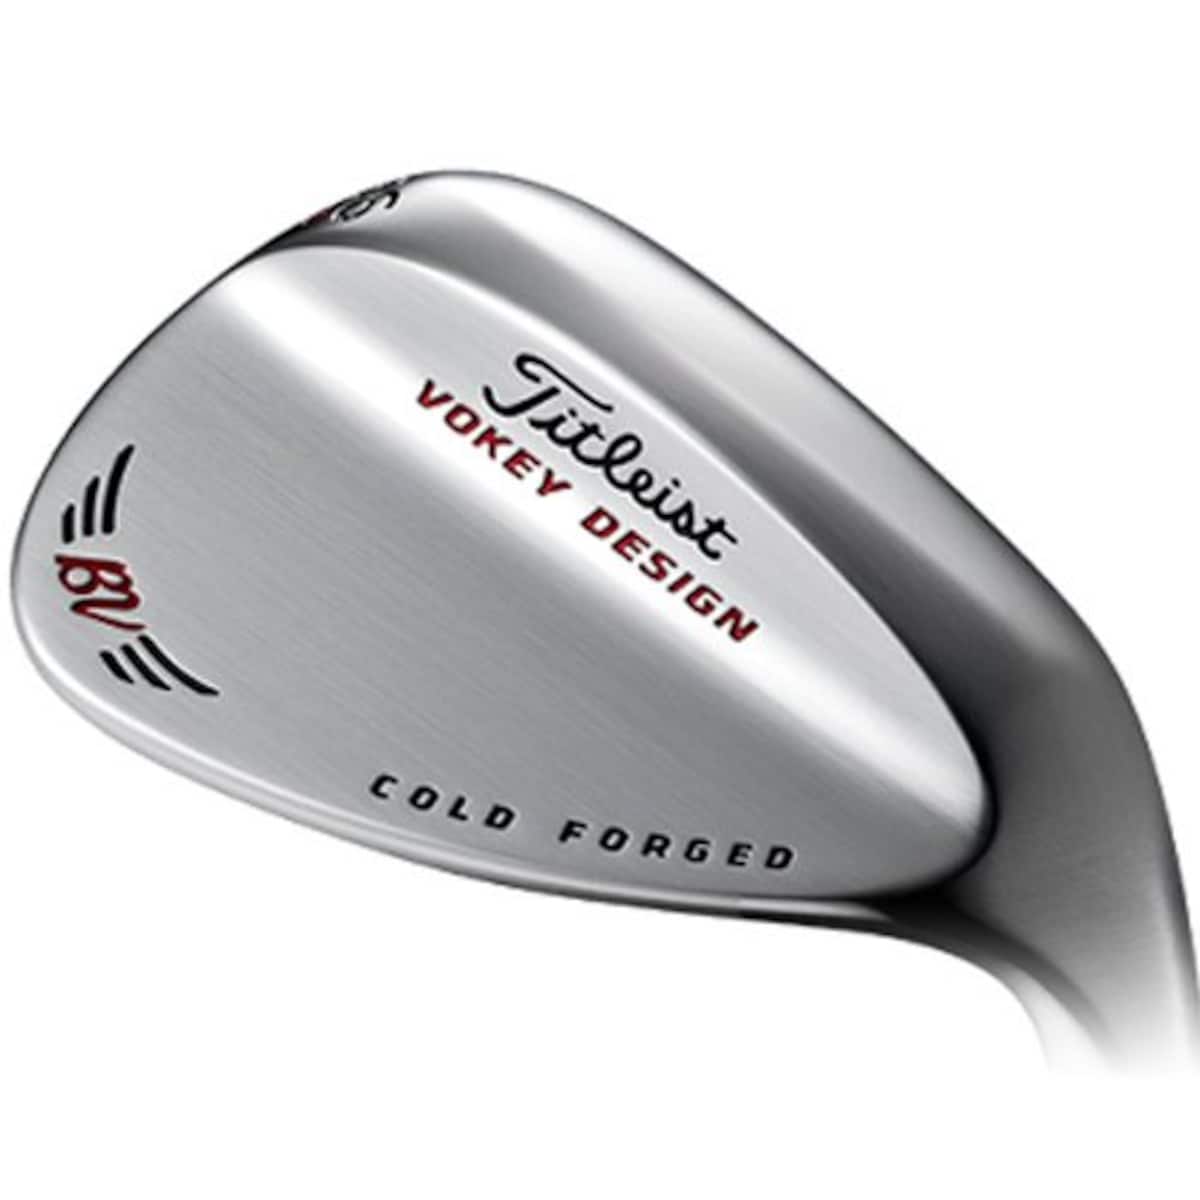 VOKEY DESIGN COLD FORGED WEDGE